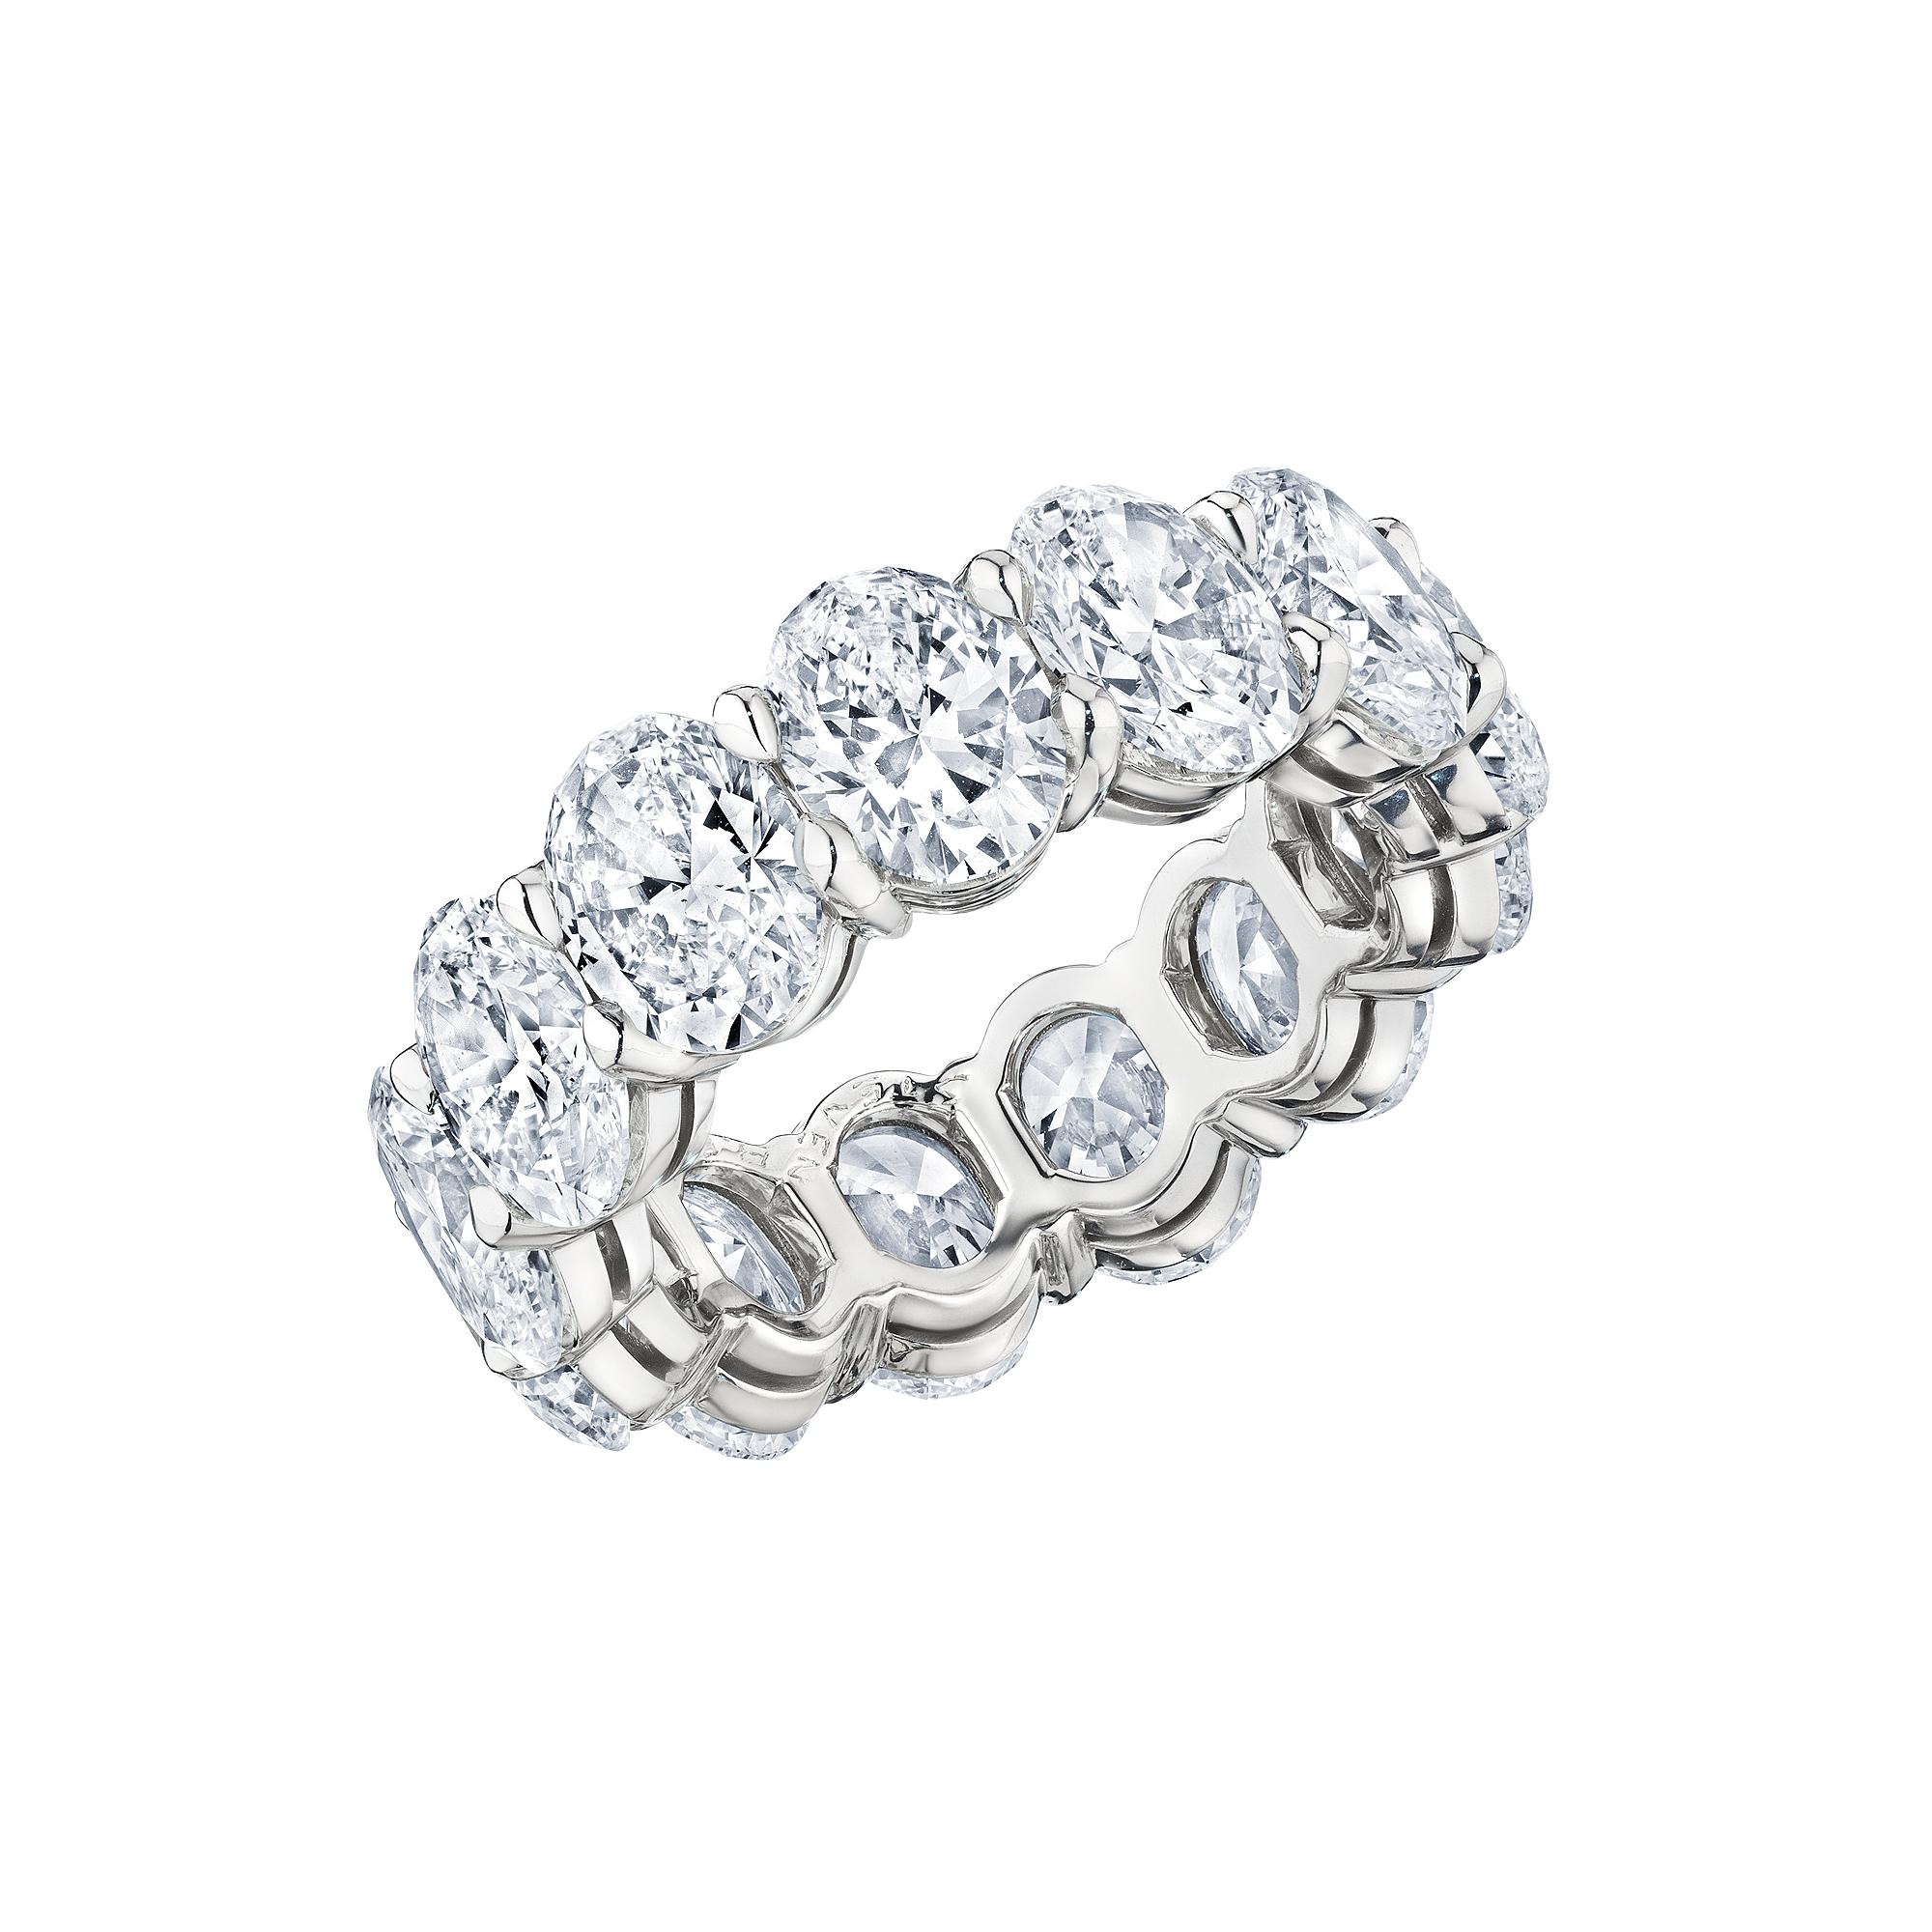 Oval Cut 9.55 Carat Diamond Platinum Eternity Band In New Condition For Sale In Greenwich, CT